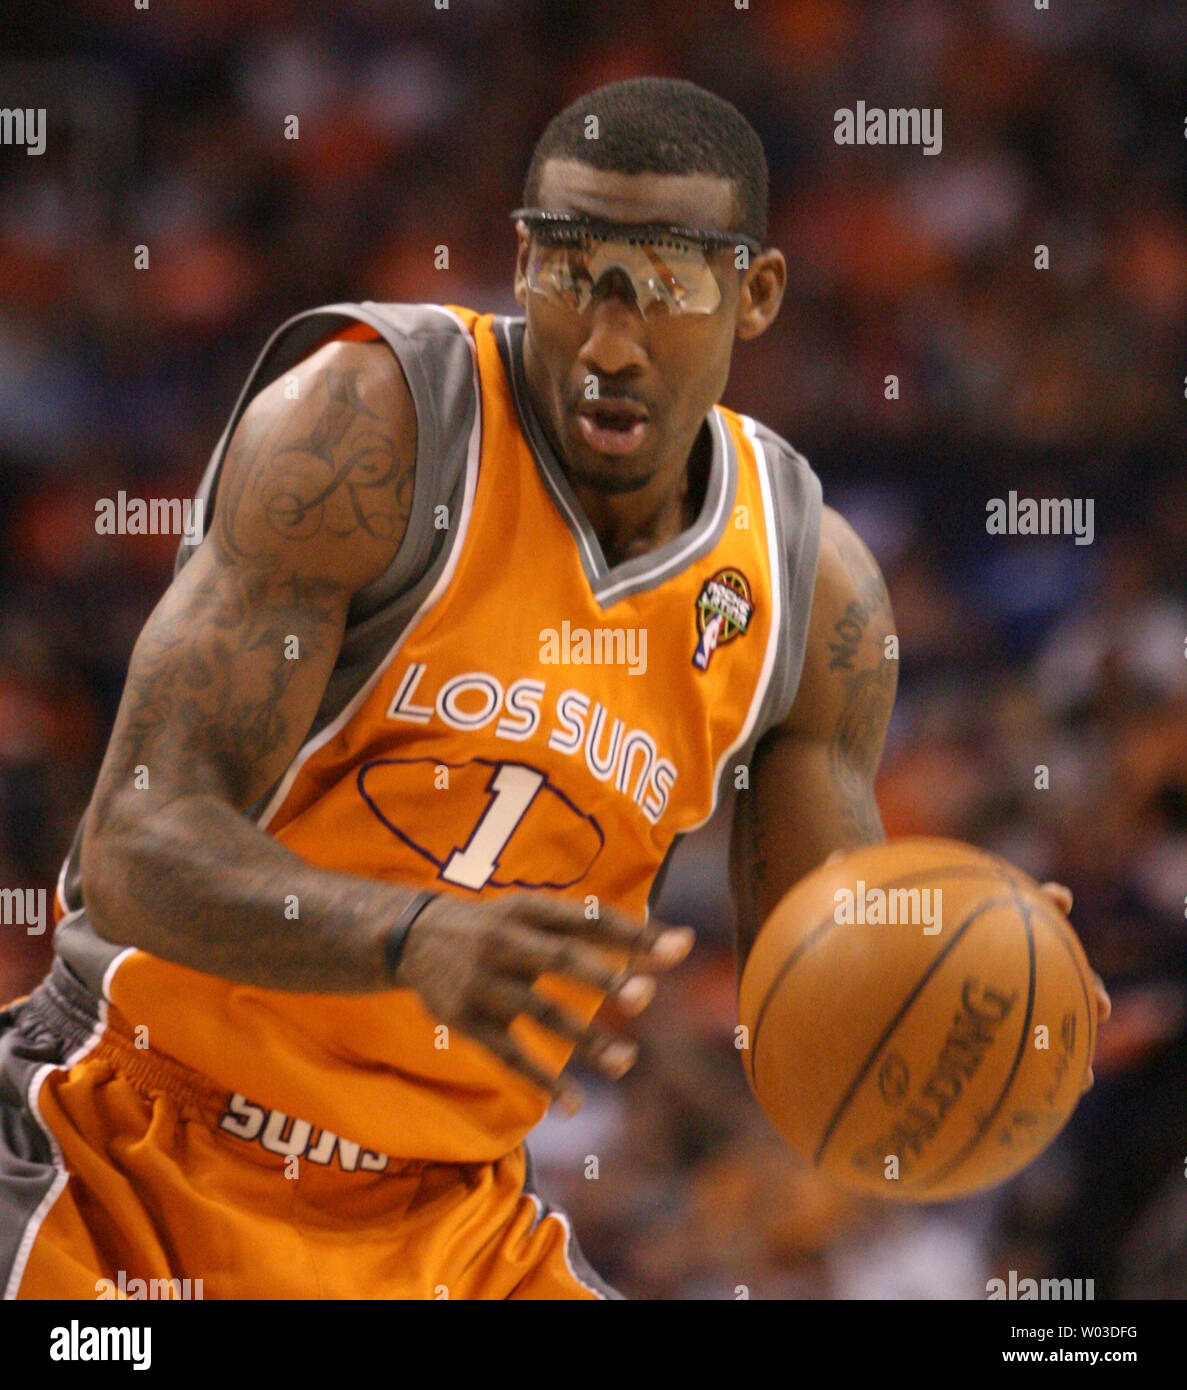 Phoenix SunsAmare Stoudemire wears the Los Suns jersey which is indicative of the immigration controversy in Arizona during the first  quarter of  Game 2 of the second round of the NBA Western Conference Playoffs at the US Airways Center, in Phoenix, AZ, May 5,2010.   UPI/Art Foxall Stock Photo